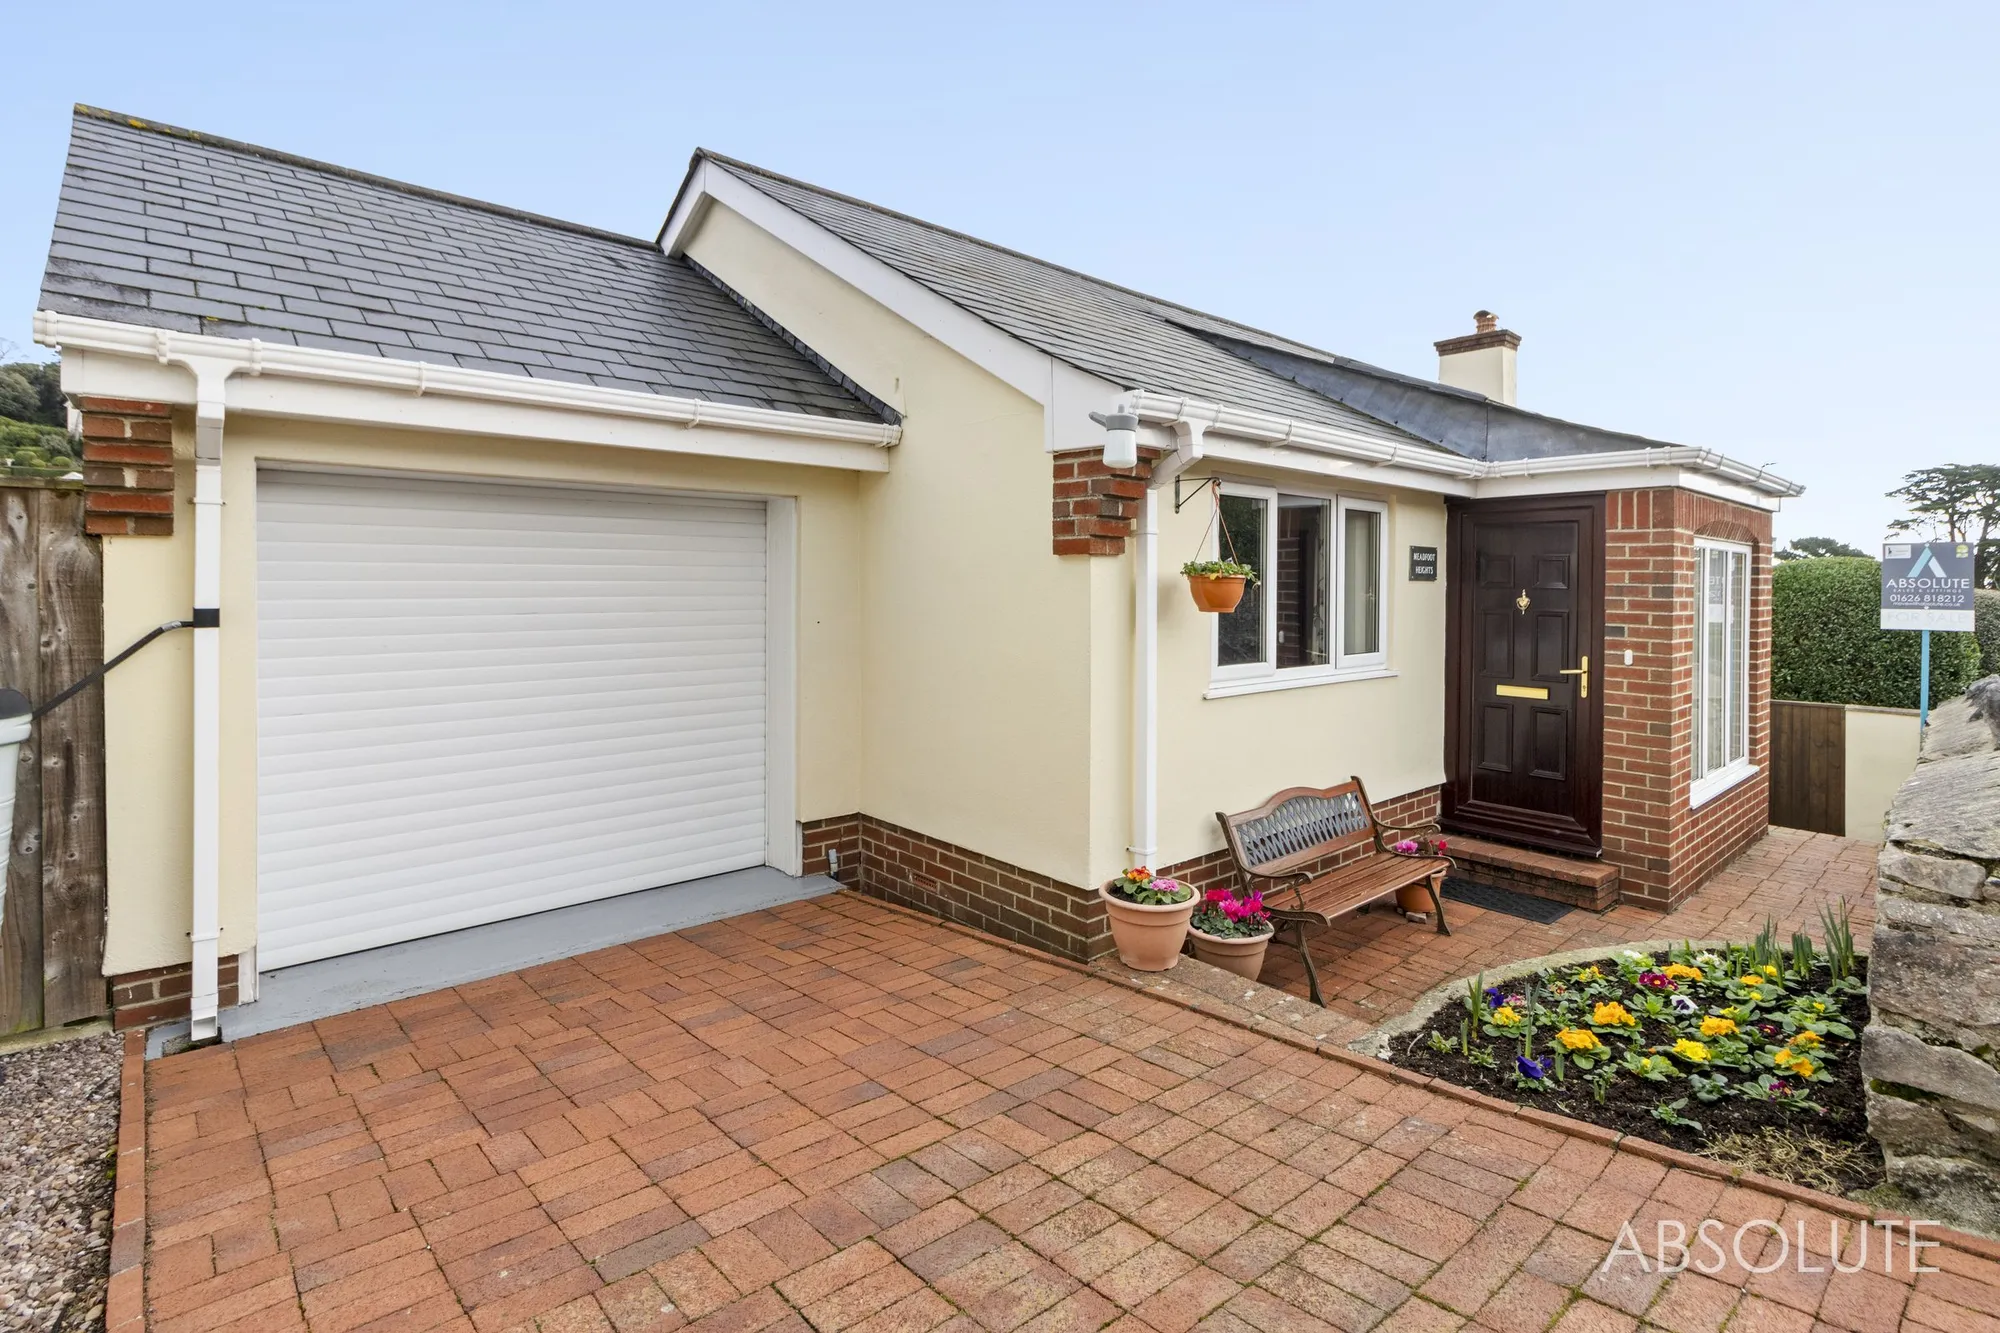 3 bed detached house for sale in St. Marks Road, Torquay  - Property Image 5